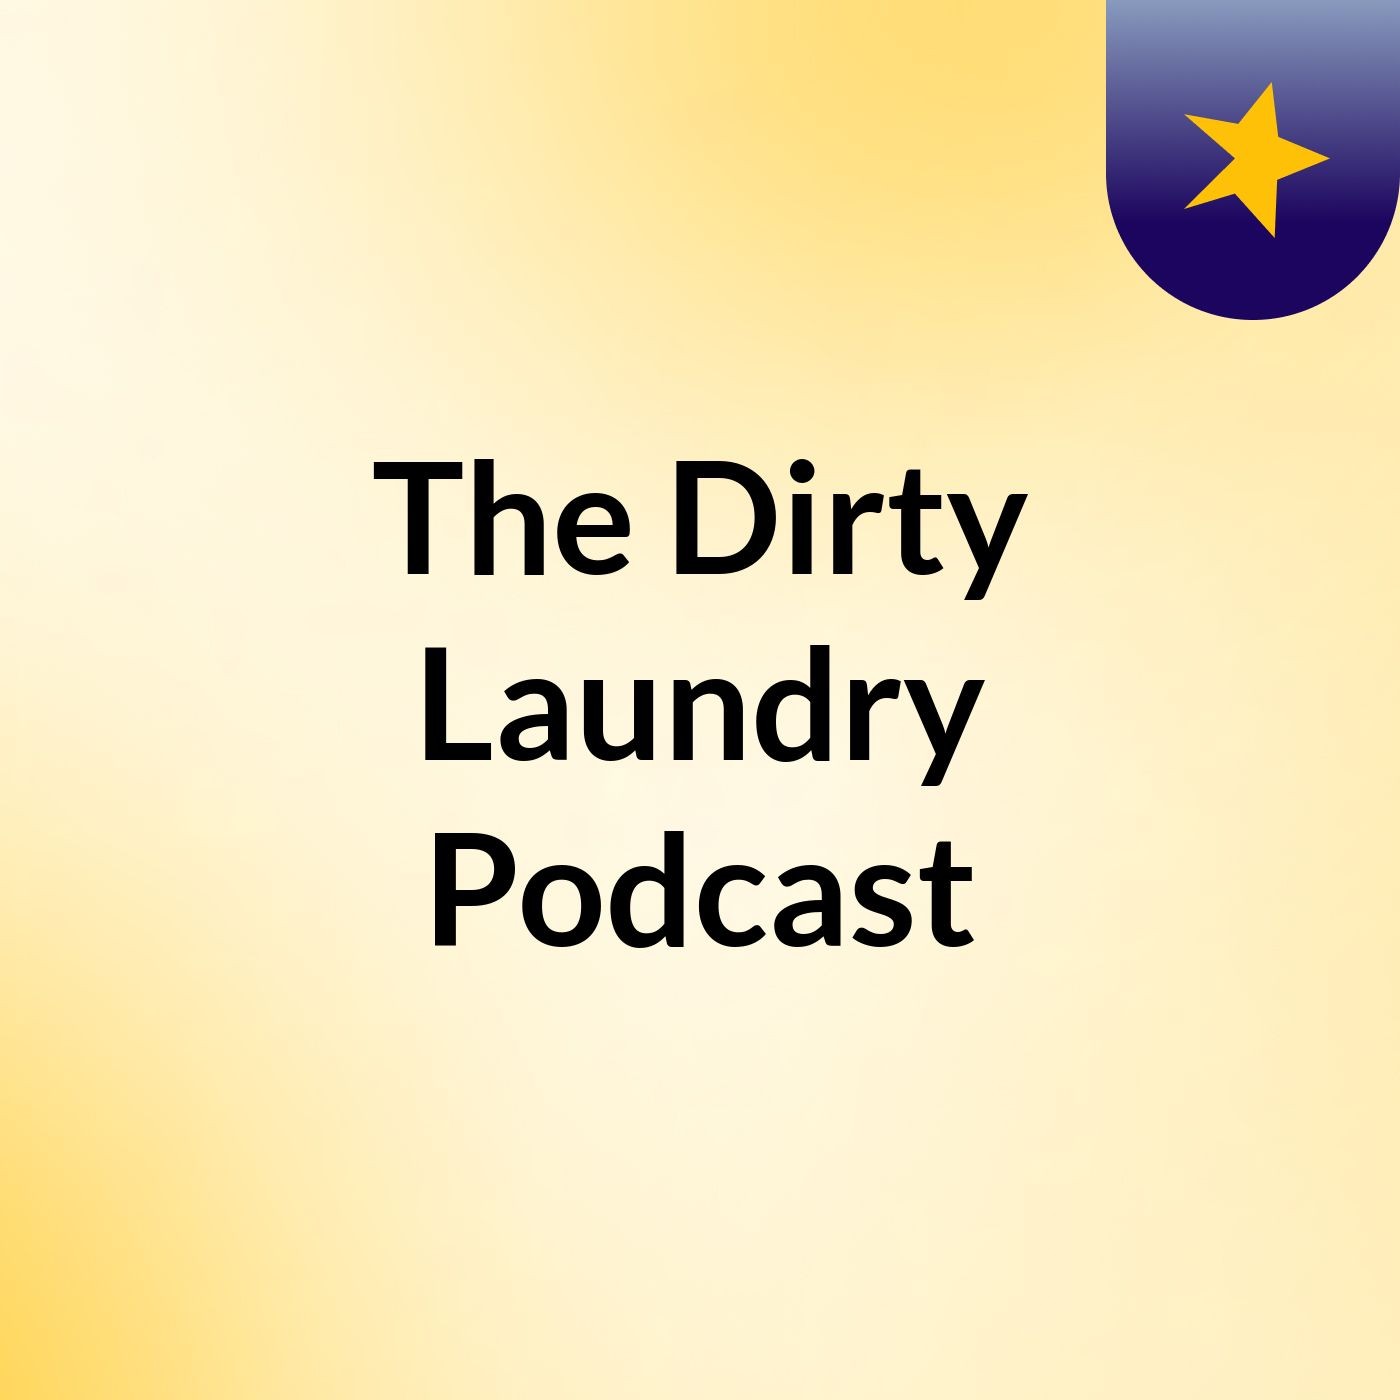 The Dirty Laundry Podcast